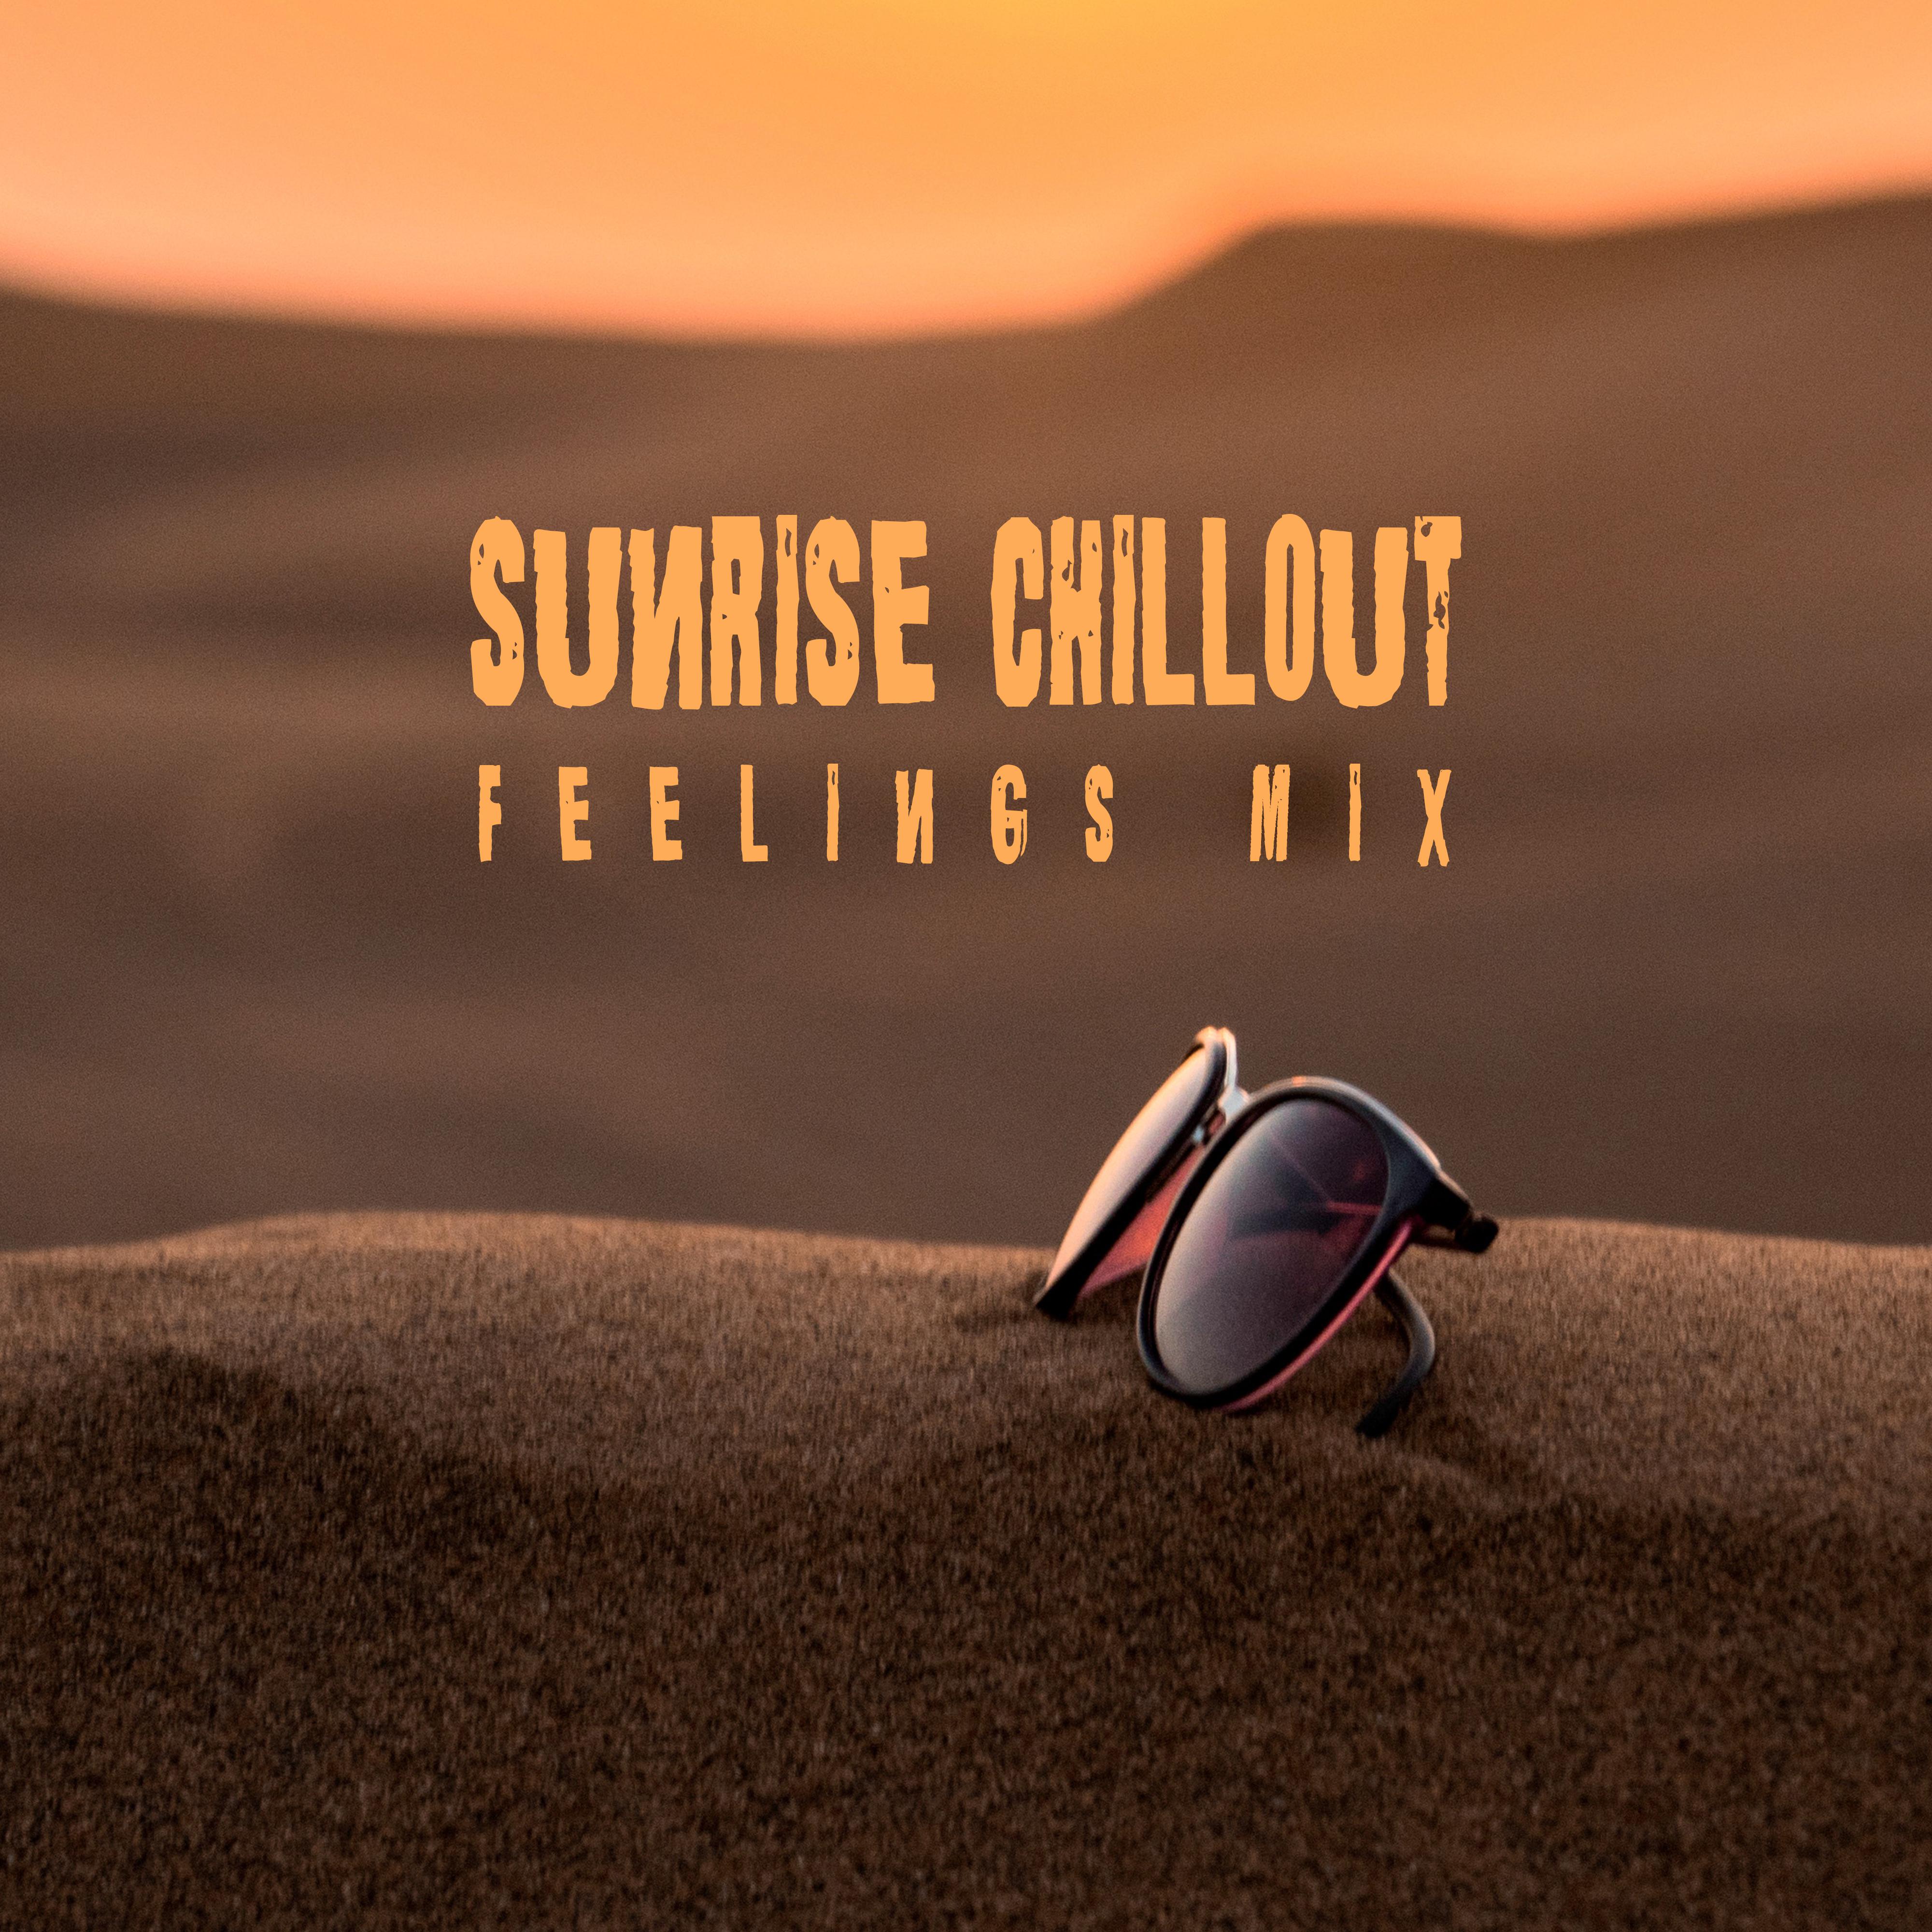 Sunrise Chillout Feelings Mix: Top 2019 Chill Out Vacation Rhythms, Music for Total Relaxation on the Beach, Summer Holiday Calming Beats & Soothing Melodies